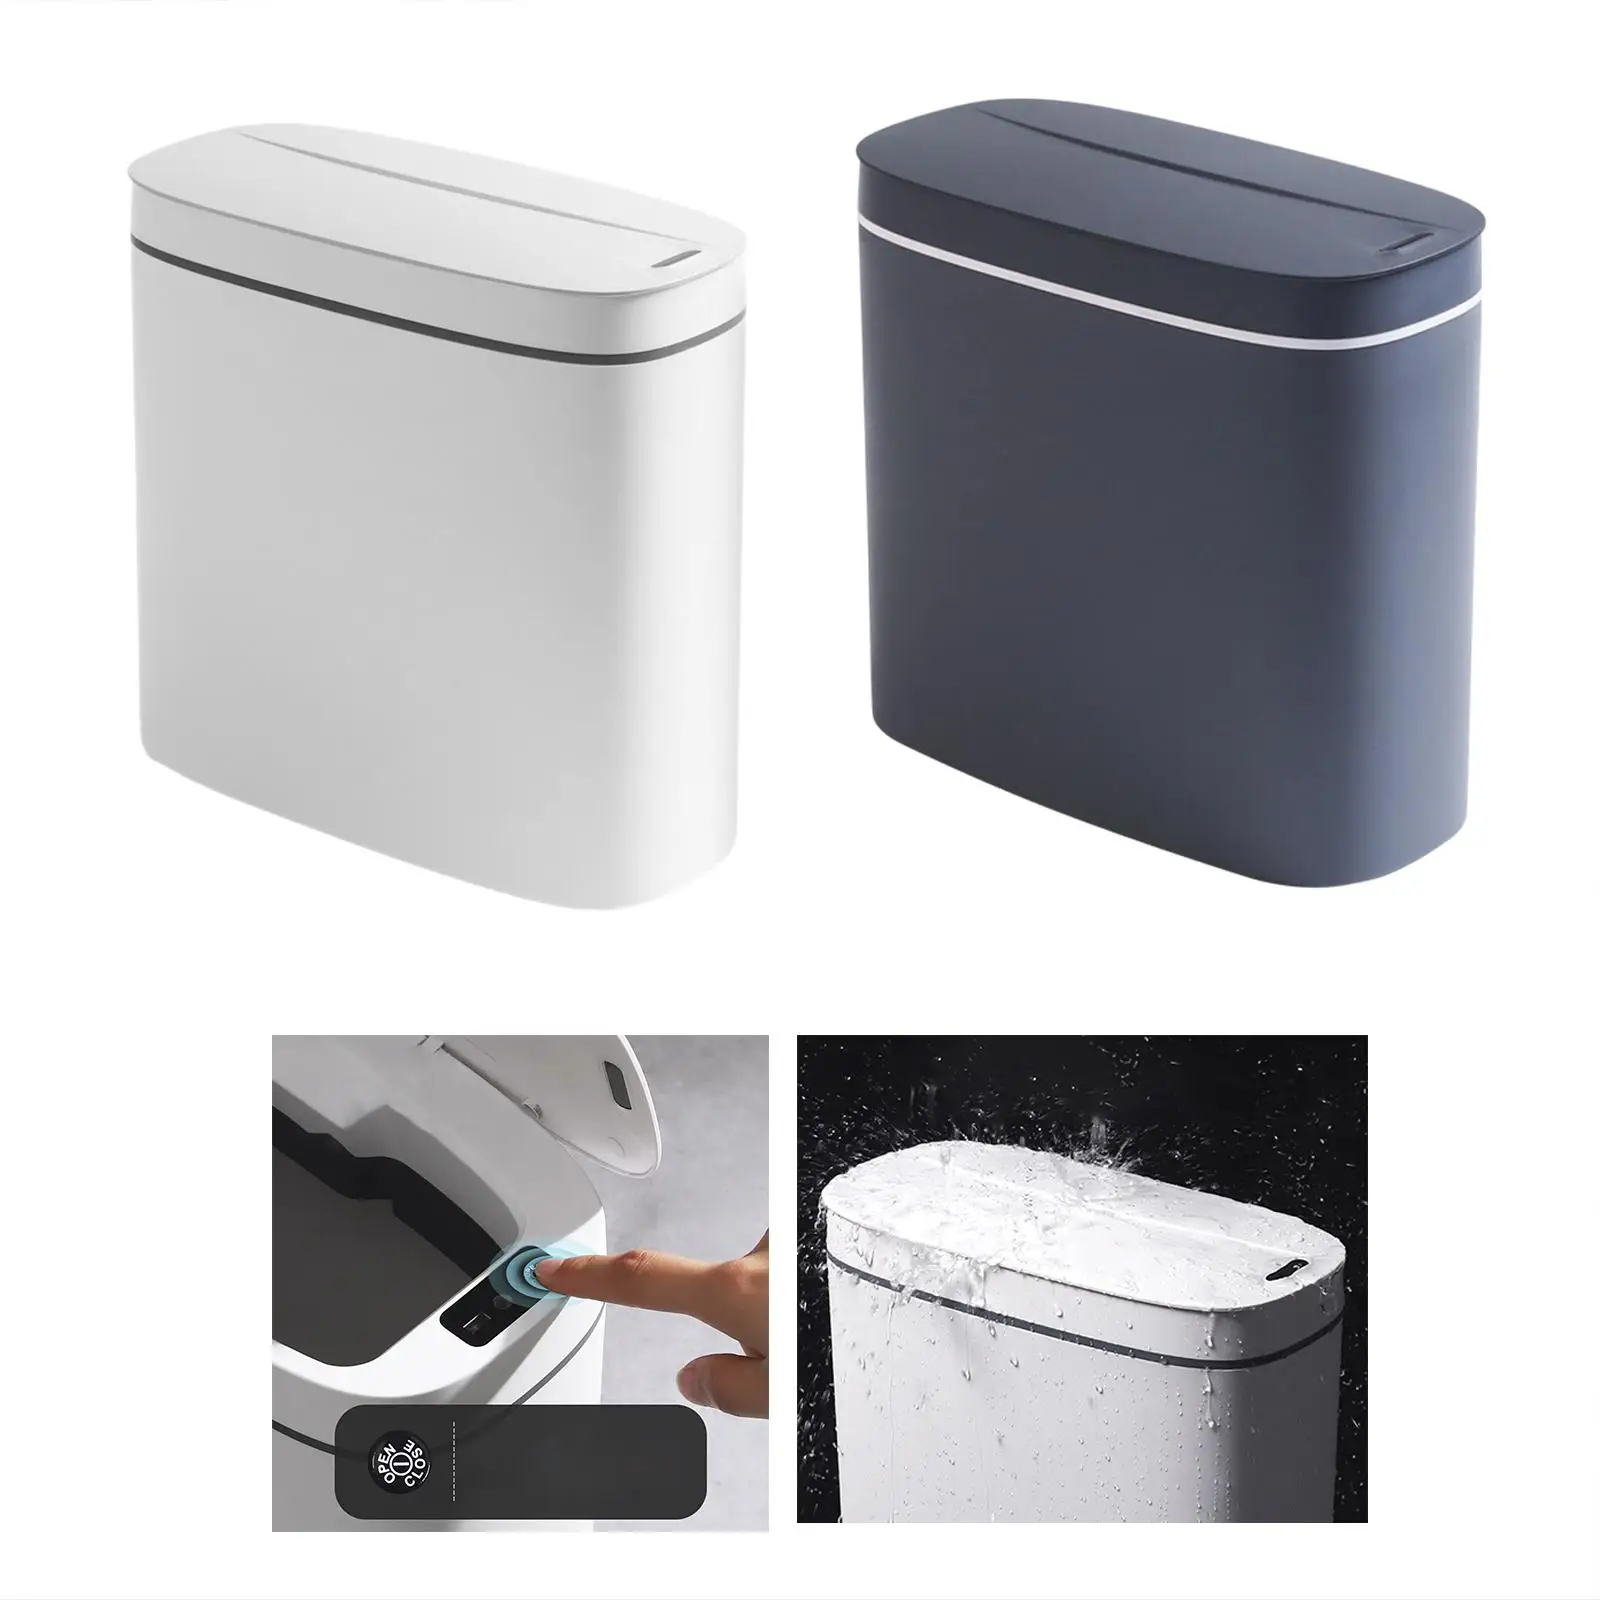  Touchless Motion Sensor Trash Can Waste  13L Waterproof for 